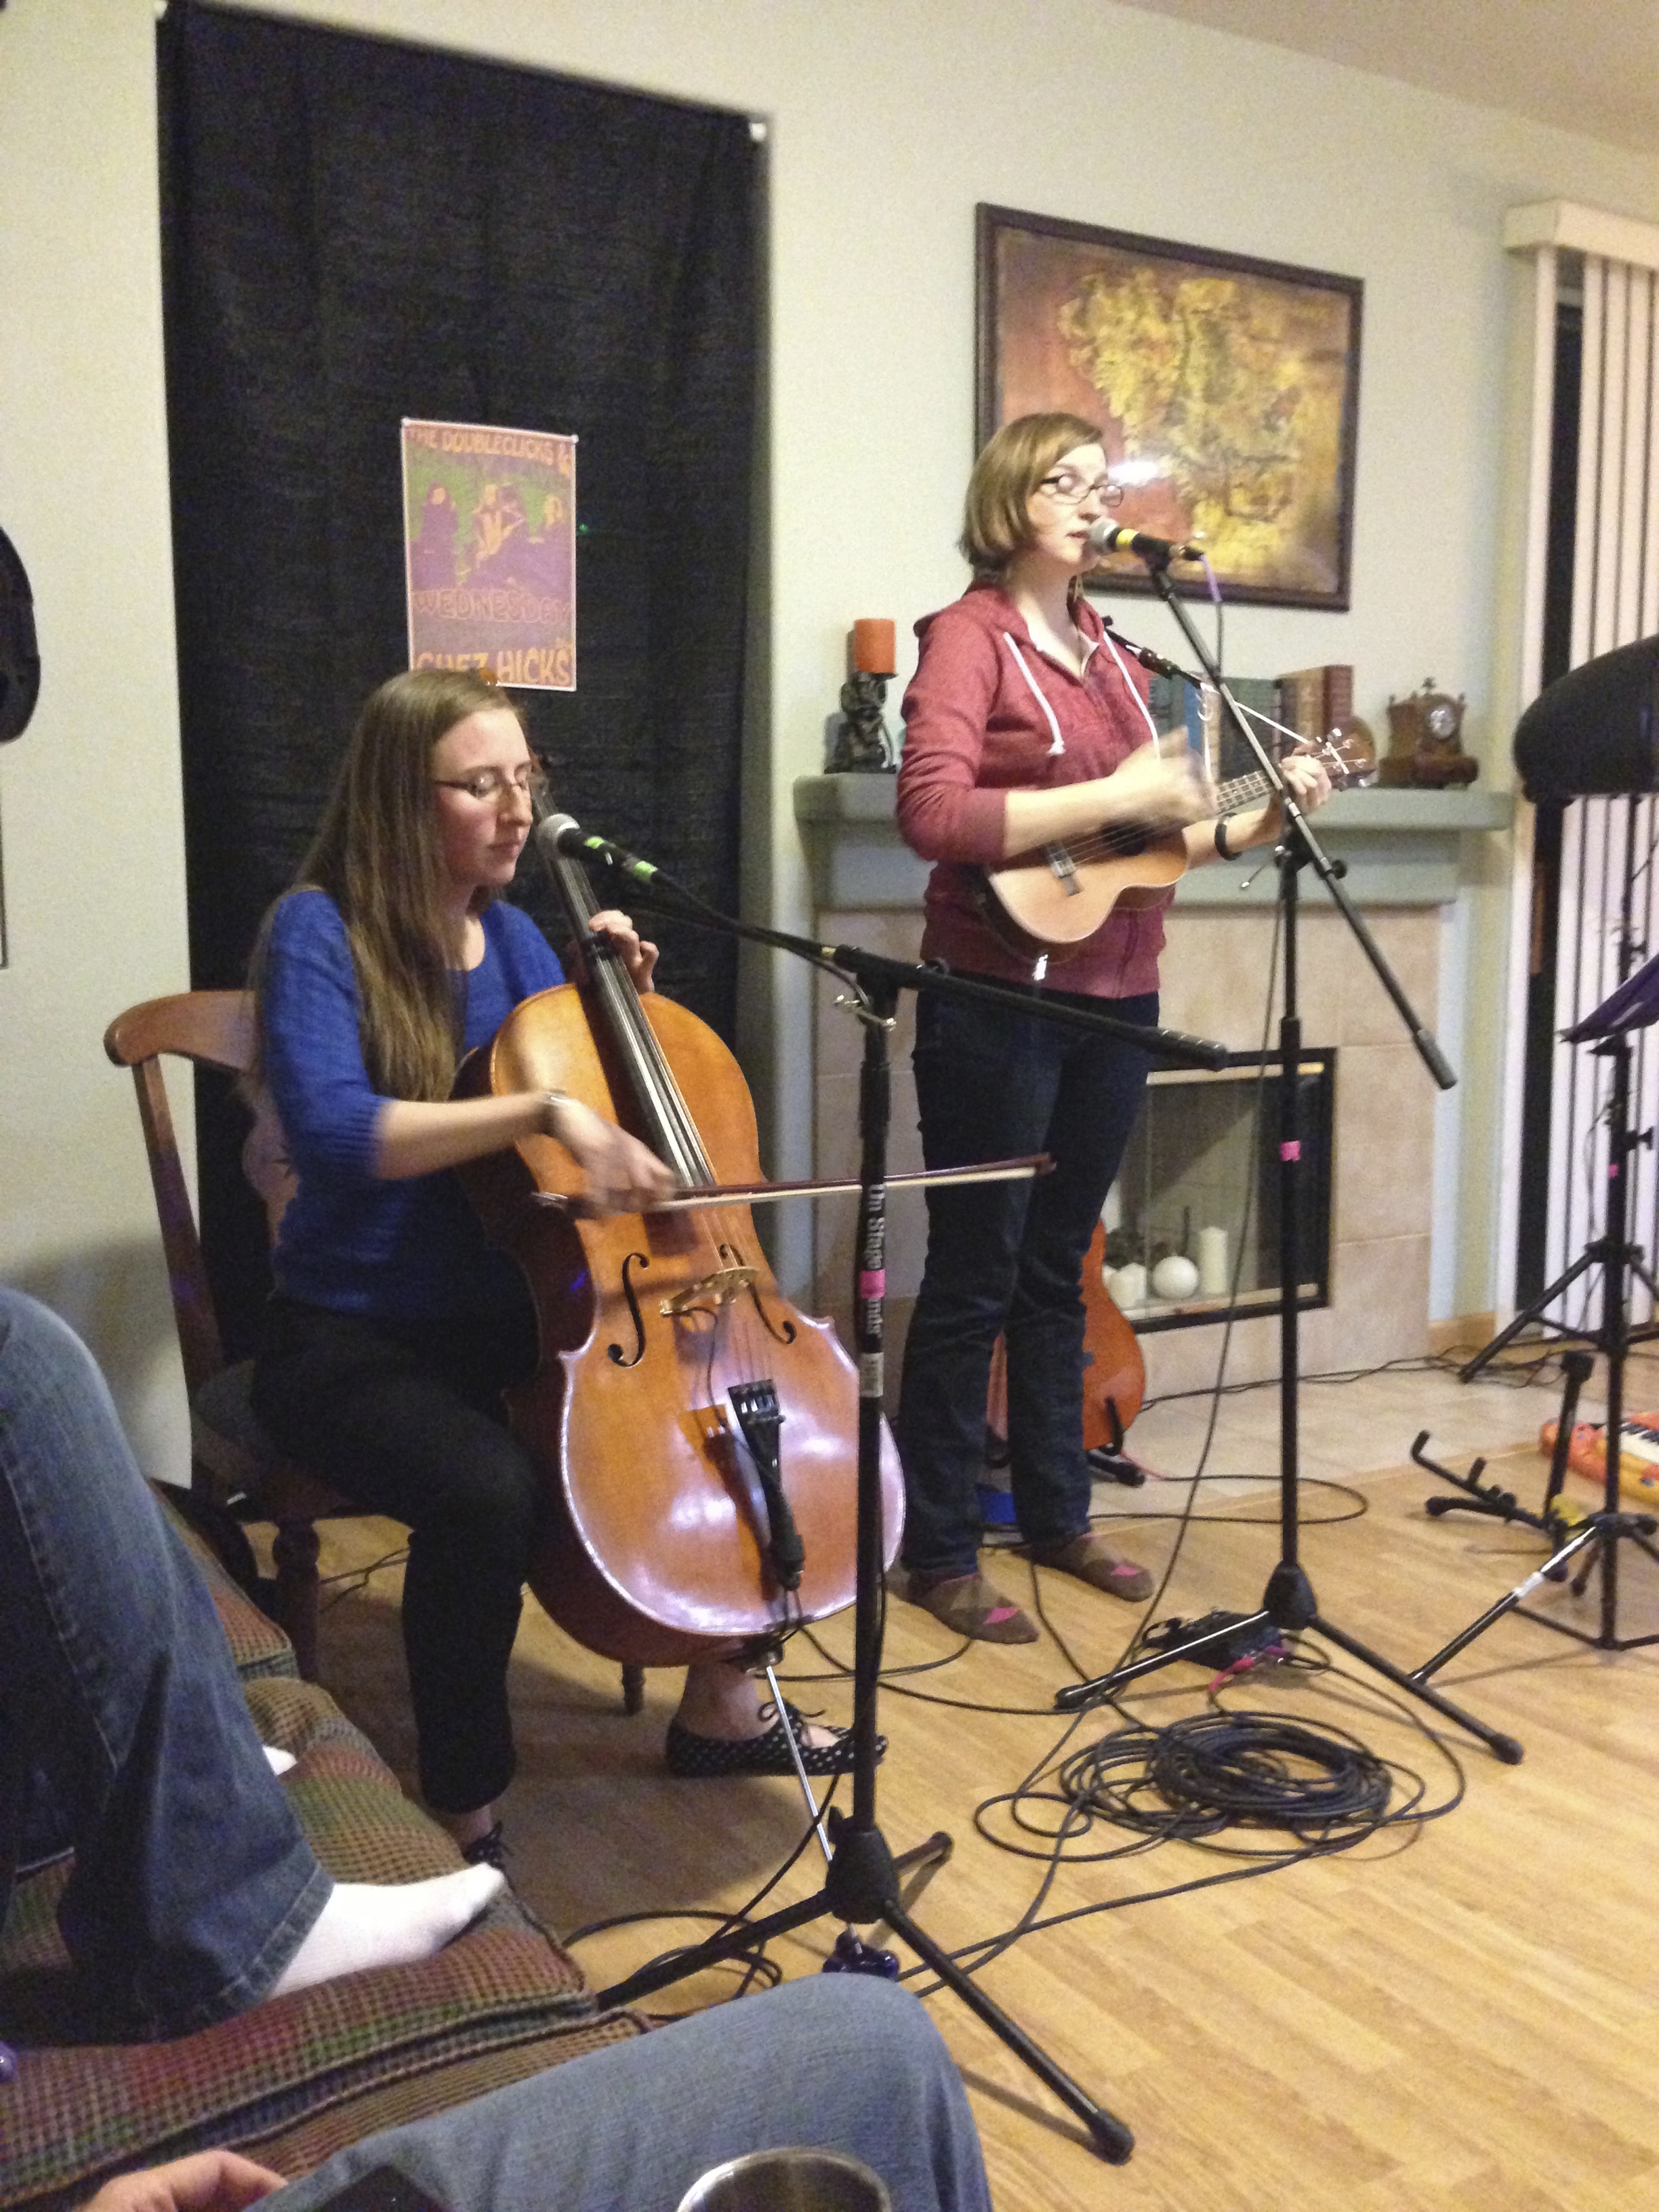 Photo of the Doubleclicks performing in our living room in San Diego